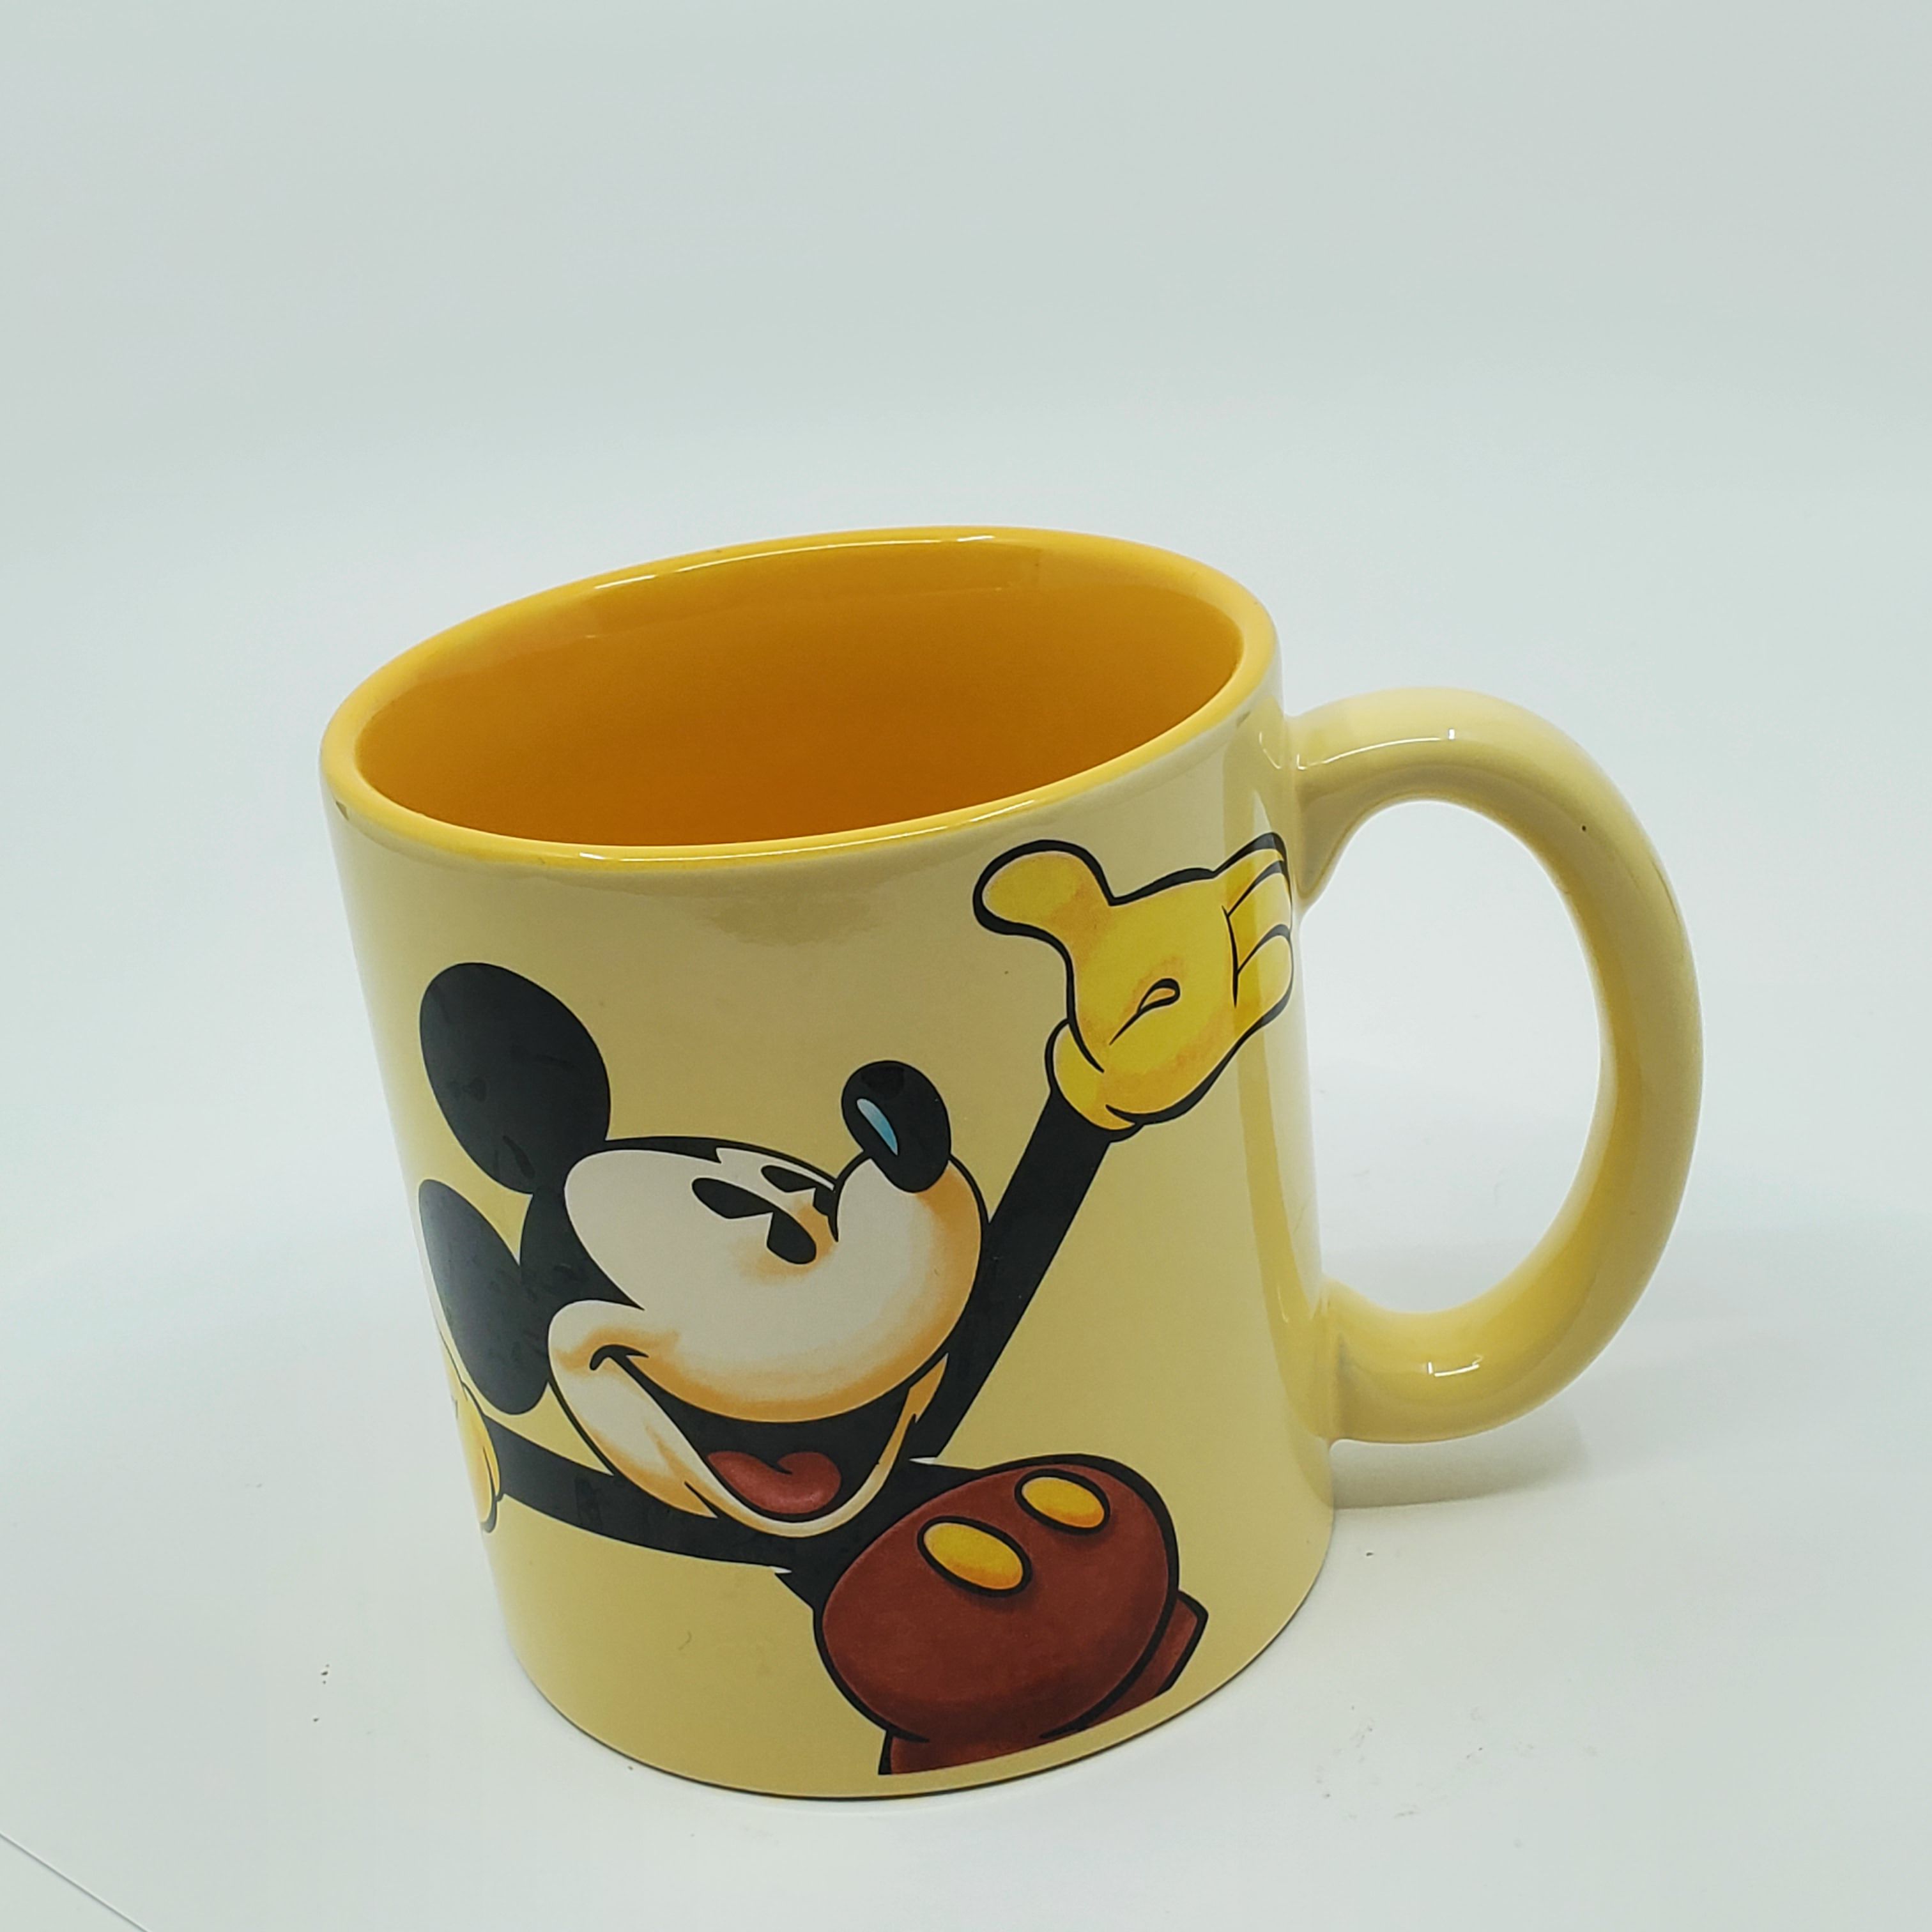 Disney Store Mickey Mouse Large Coffee Mug Tea cup. Pre-owned, very good shape